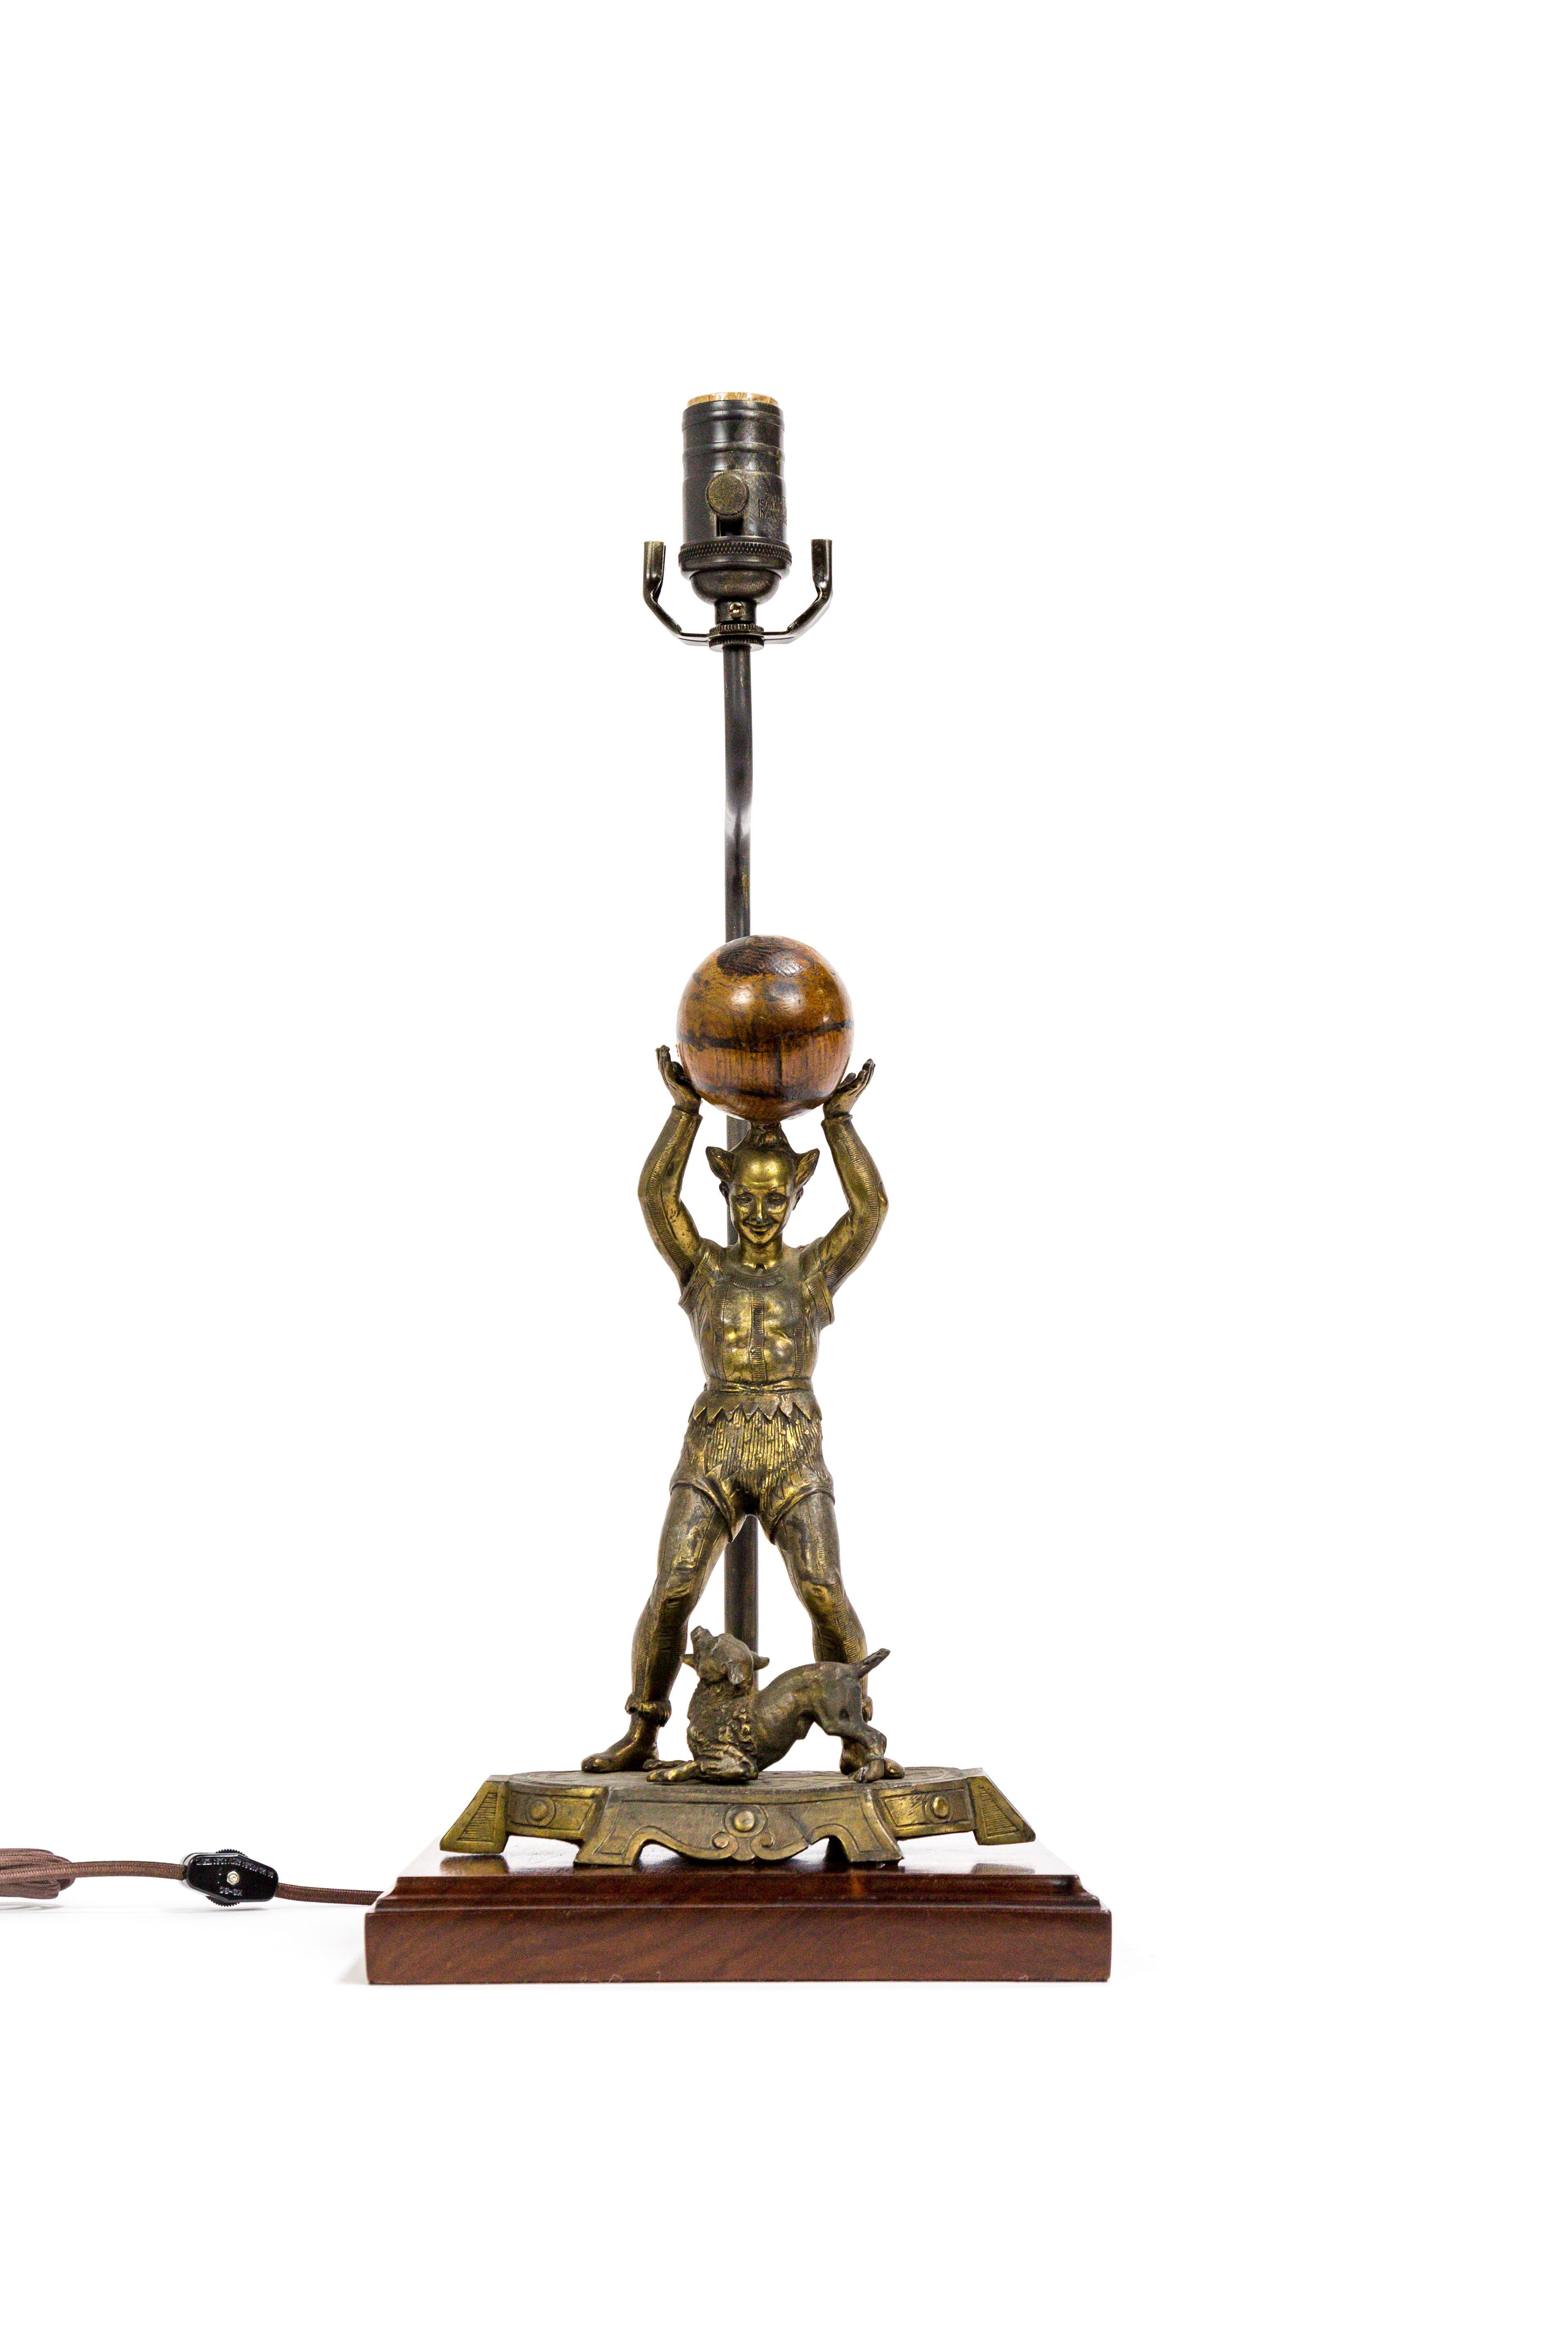 A lamp made with an exceptional sculpture of a circus performer holding a wooden ball with marvellous grain, with a dog at his feet. (Spelter with brass patina). The piece was made in France in the 1880s; now complimented by a walnut base and